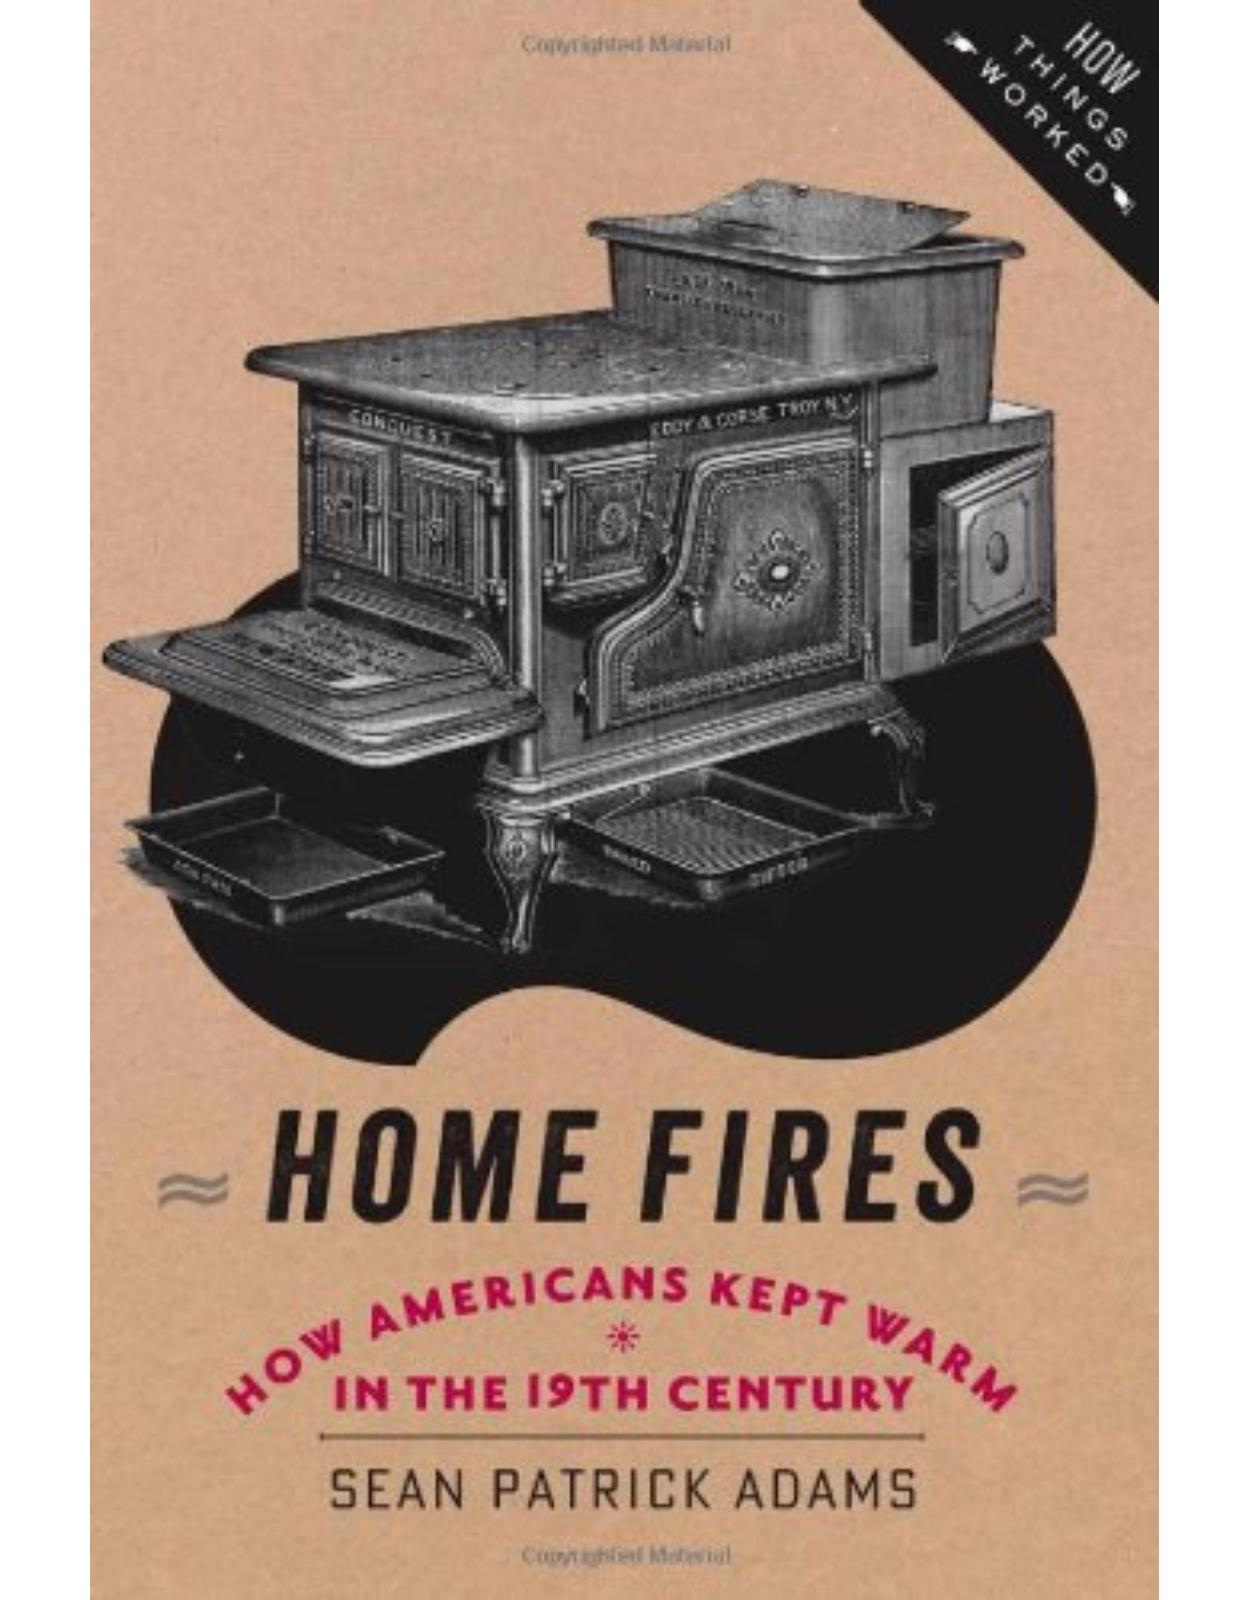 Home Fires, How Americans Kept Warm in the Nineteenth Century